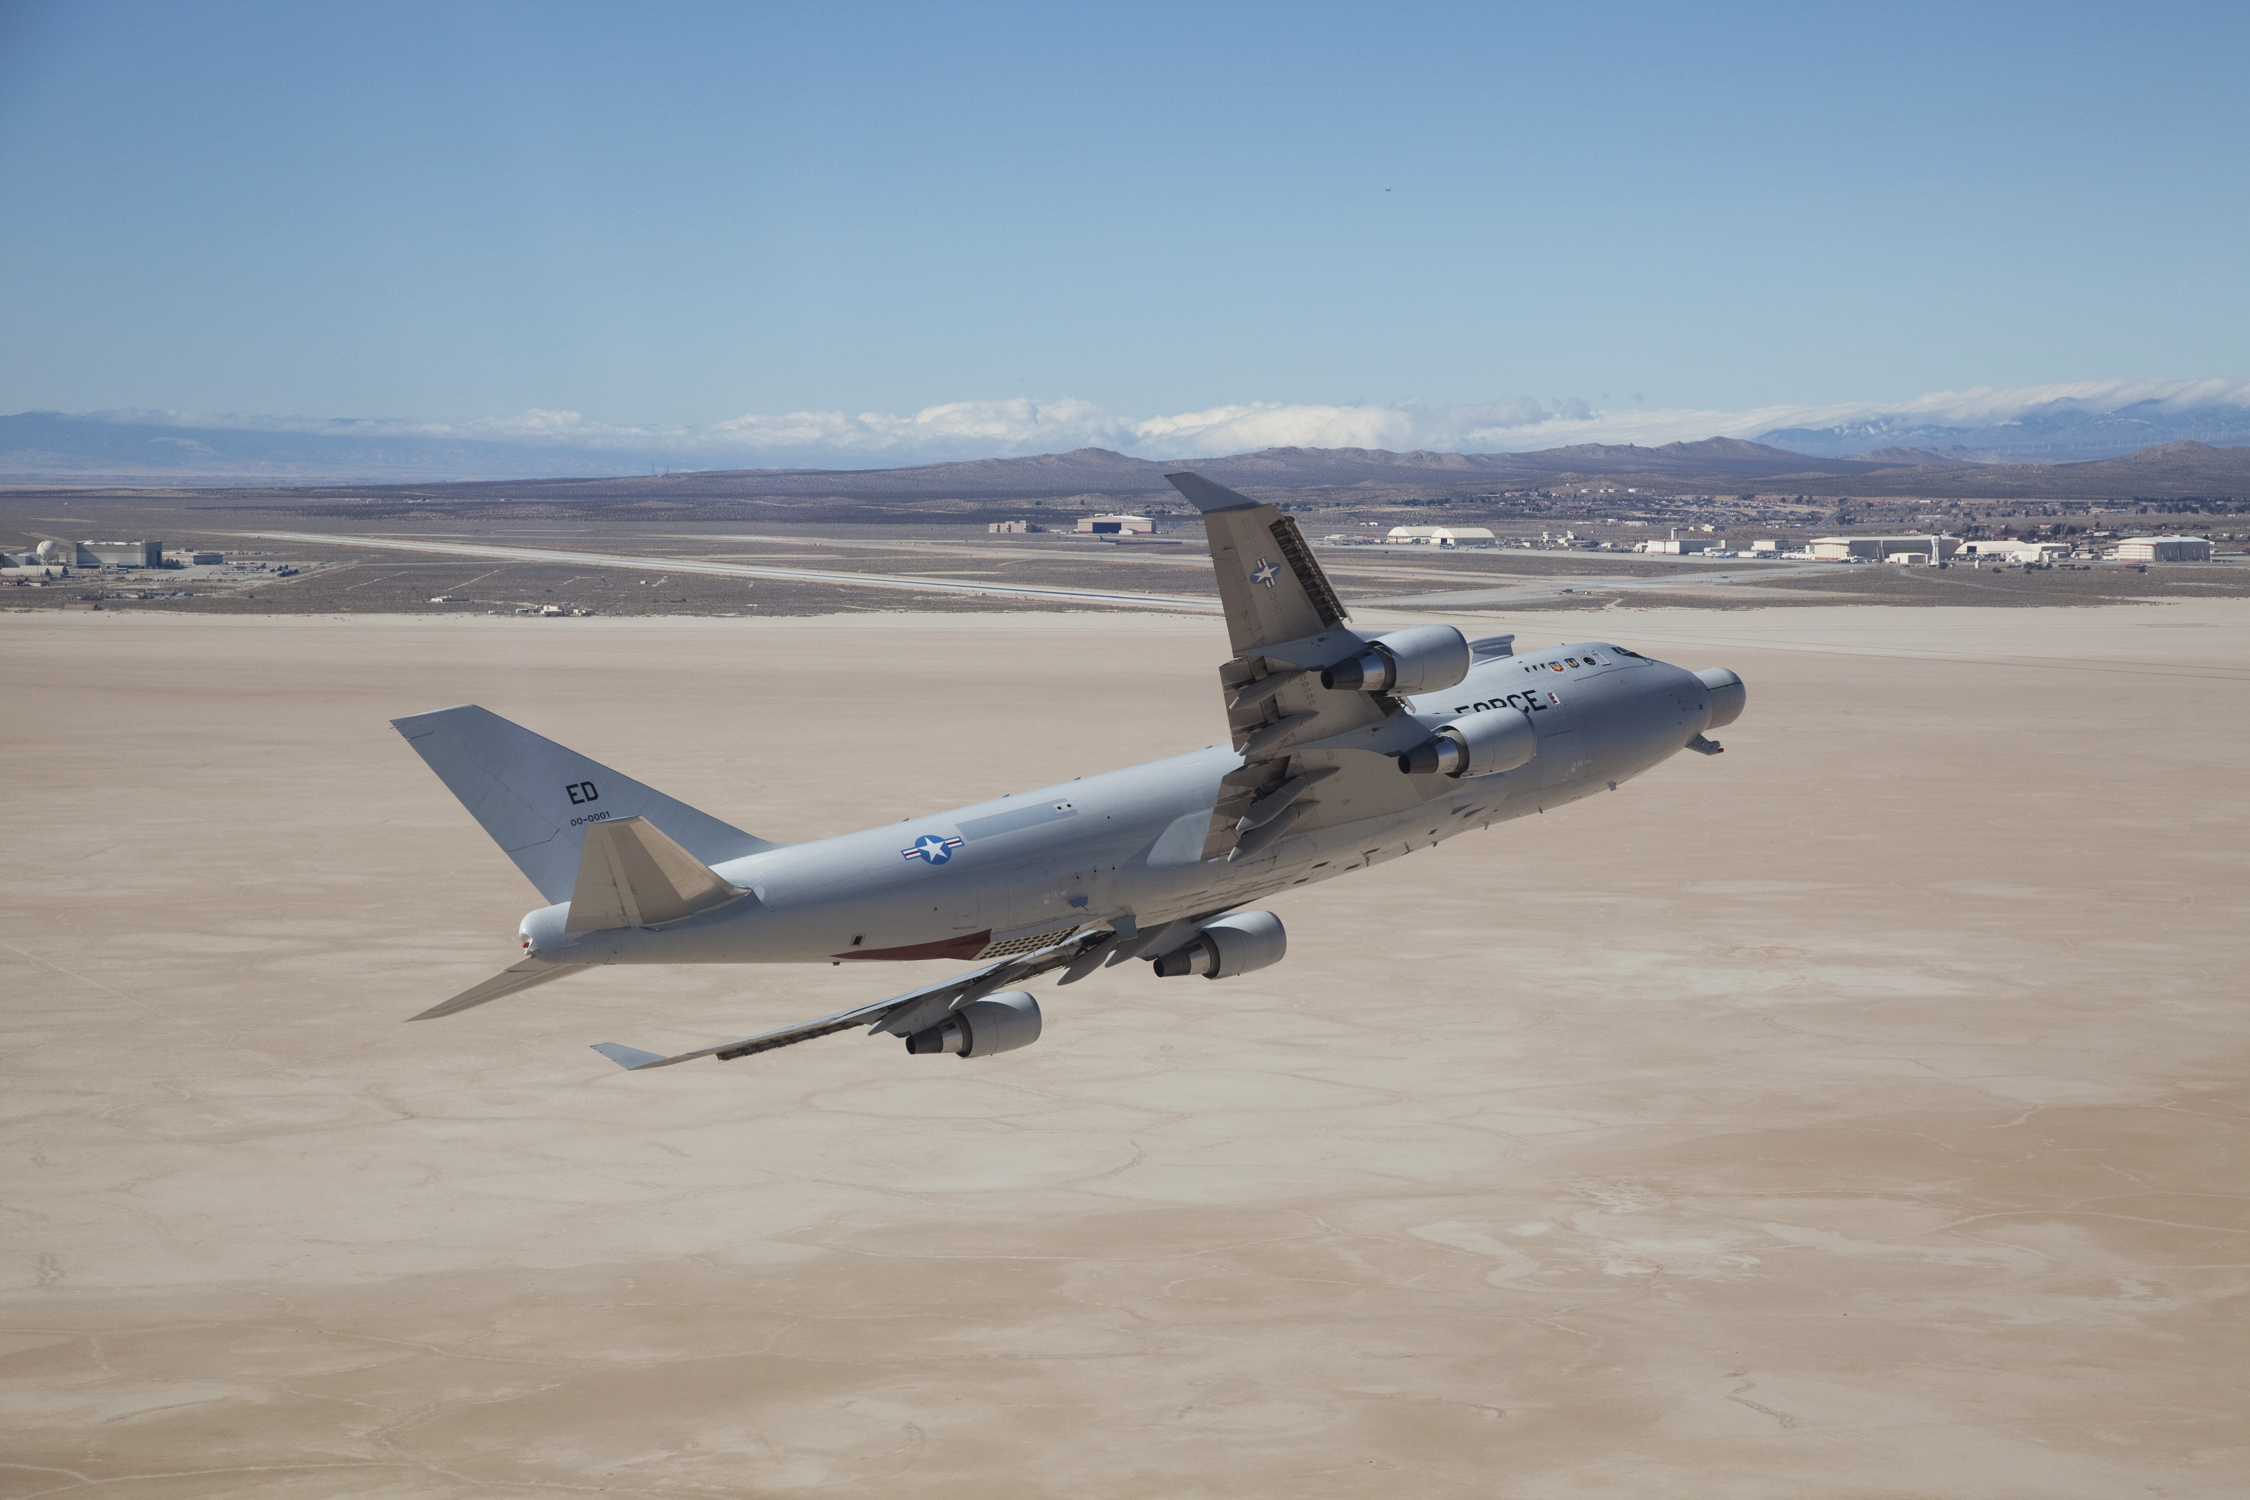 Boeing YAL-1A, 00-0001, Airborne Laser Test aircraft, departing Edwards AFB, 14 February 2012. (U.S. Air Force)